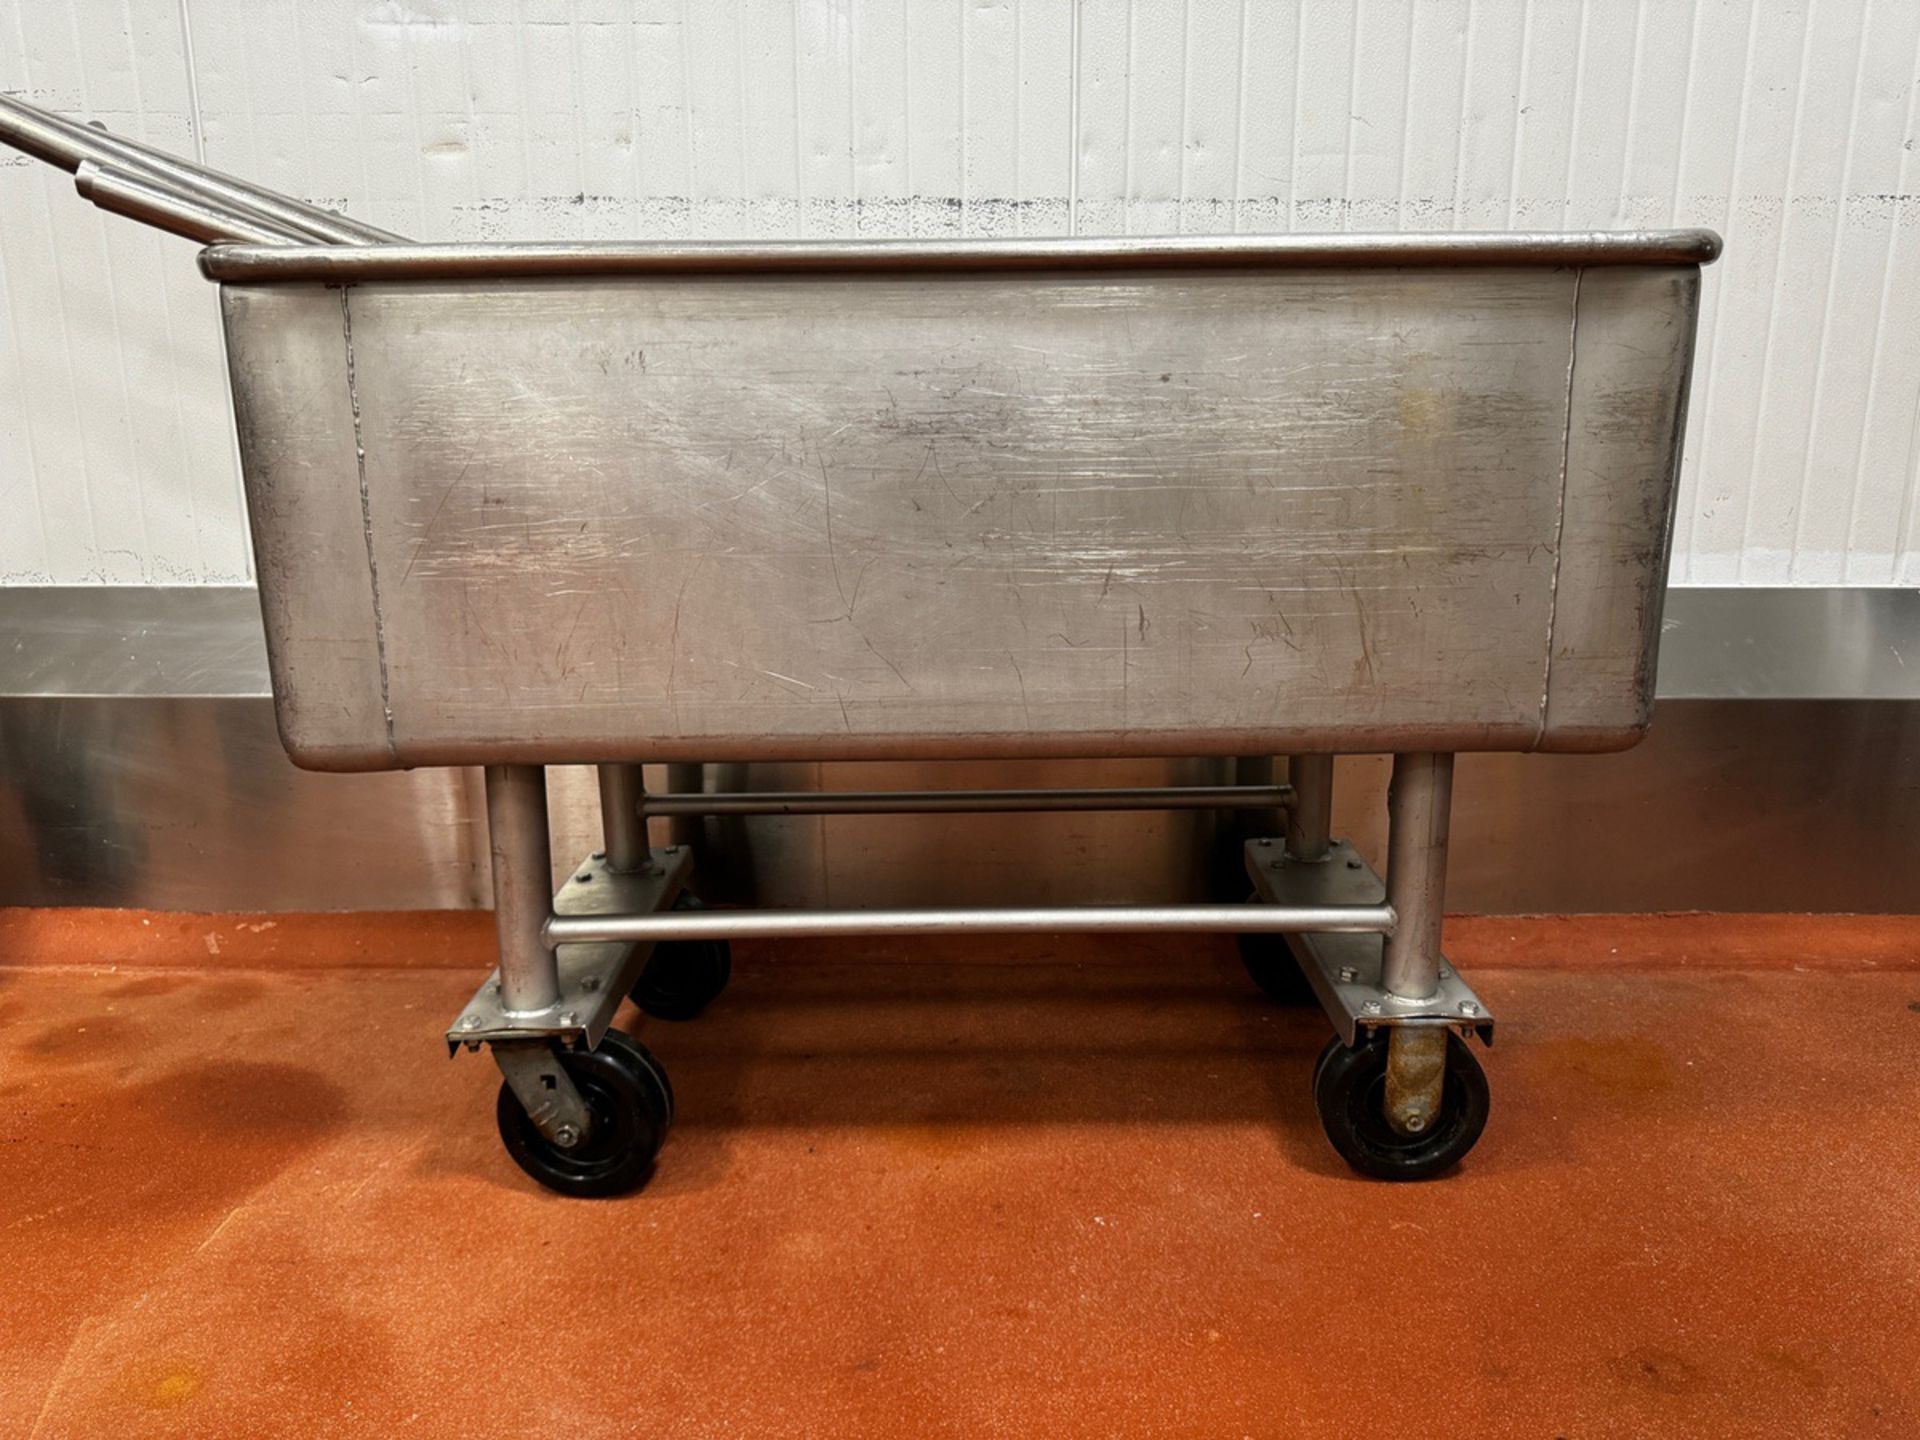 (Qty 2) Stainless Steel Mobile Hoppers